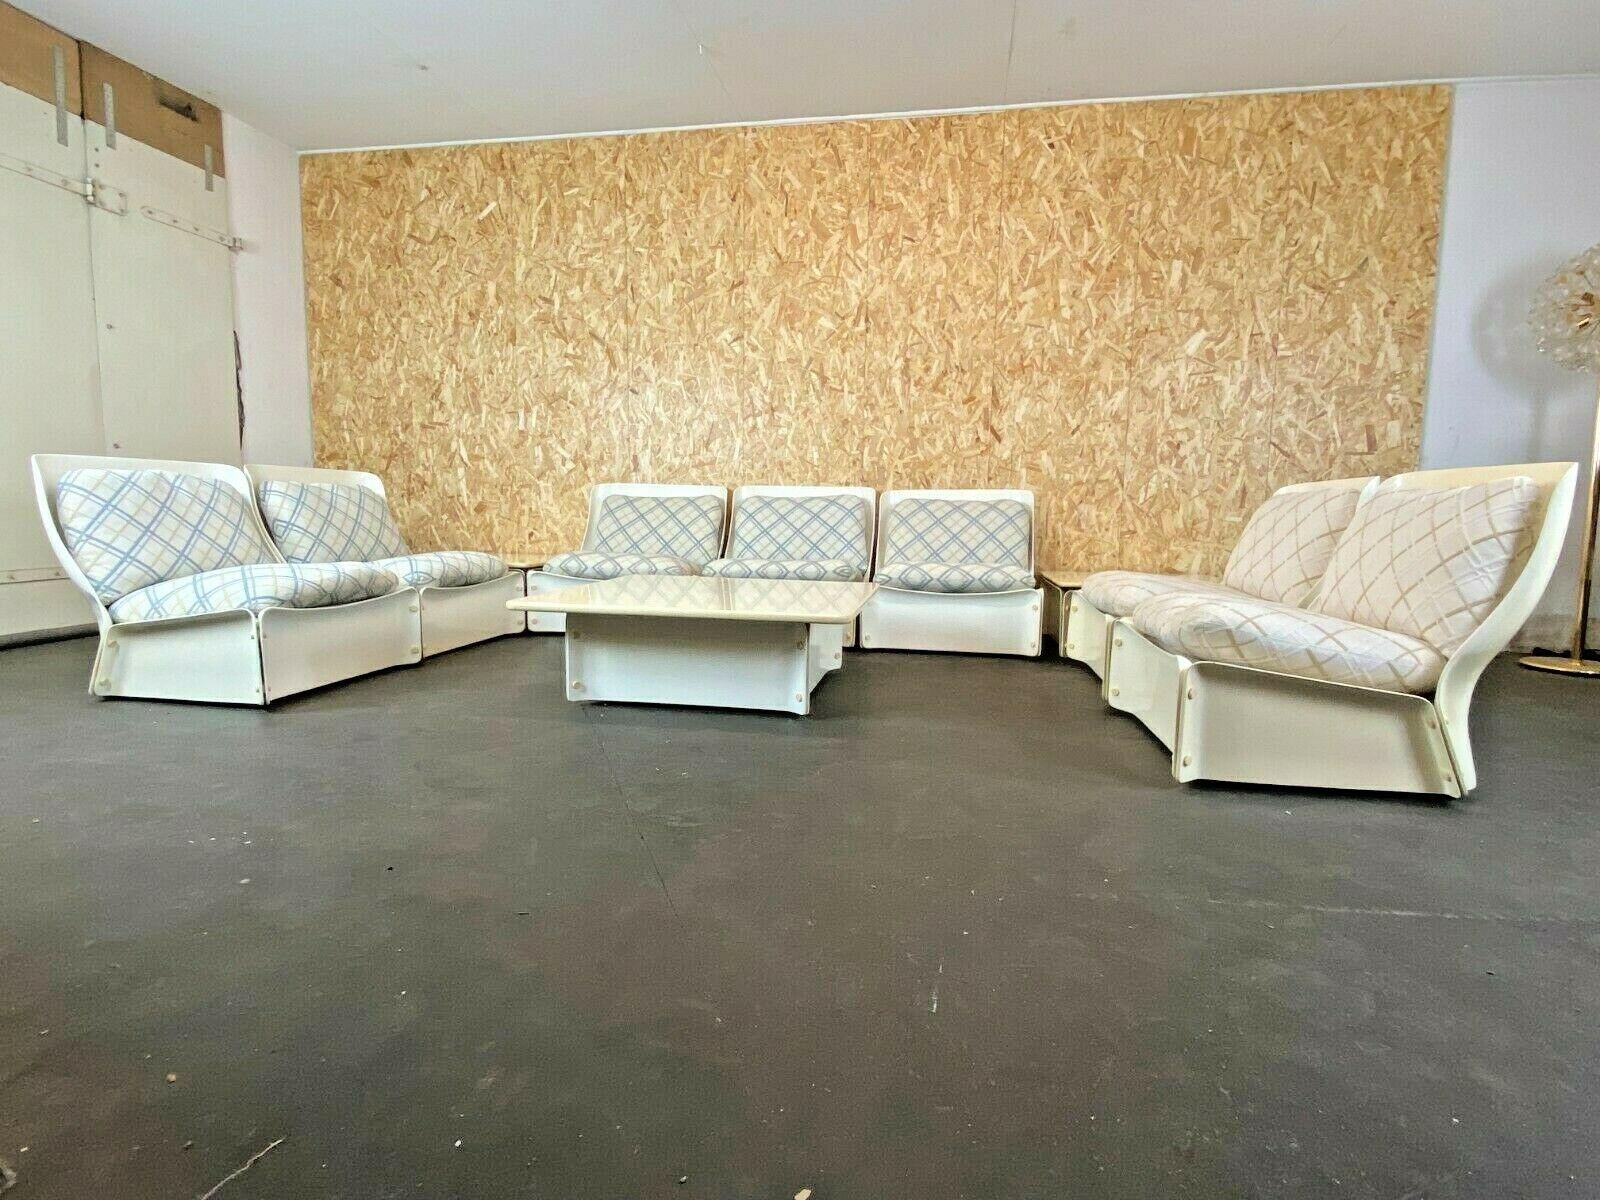 60s 70s rare modular sofa module couch design fiberglass Space Age 60s 70s

Object: sofa module

Manufacturer:

Condition: good - vintage

Age: around 1960-1970

Dimensions:

1er = 74cm x 75cm x 73.5cm / seat height = 36cm

Table small